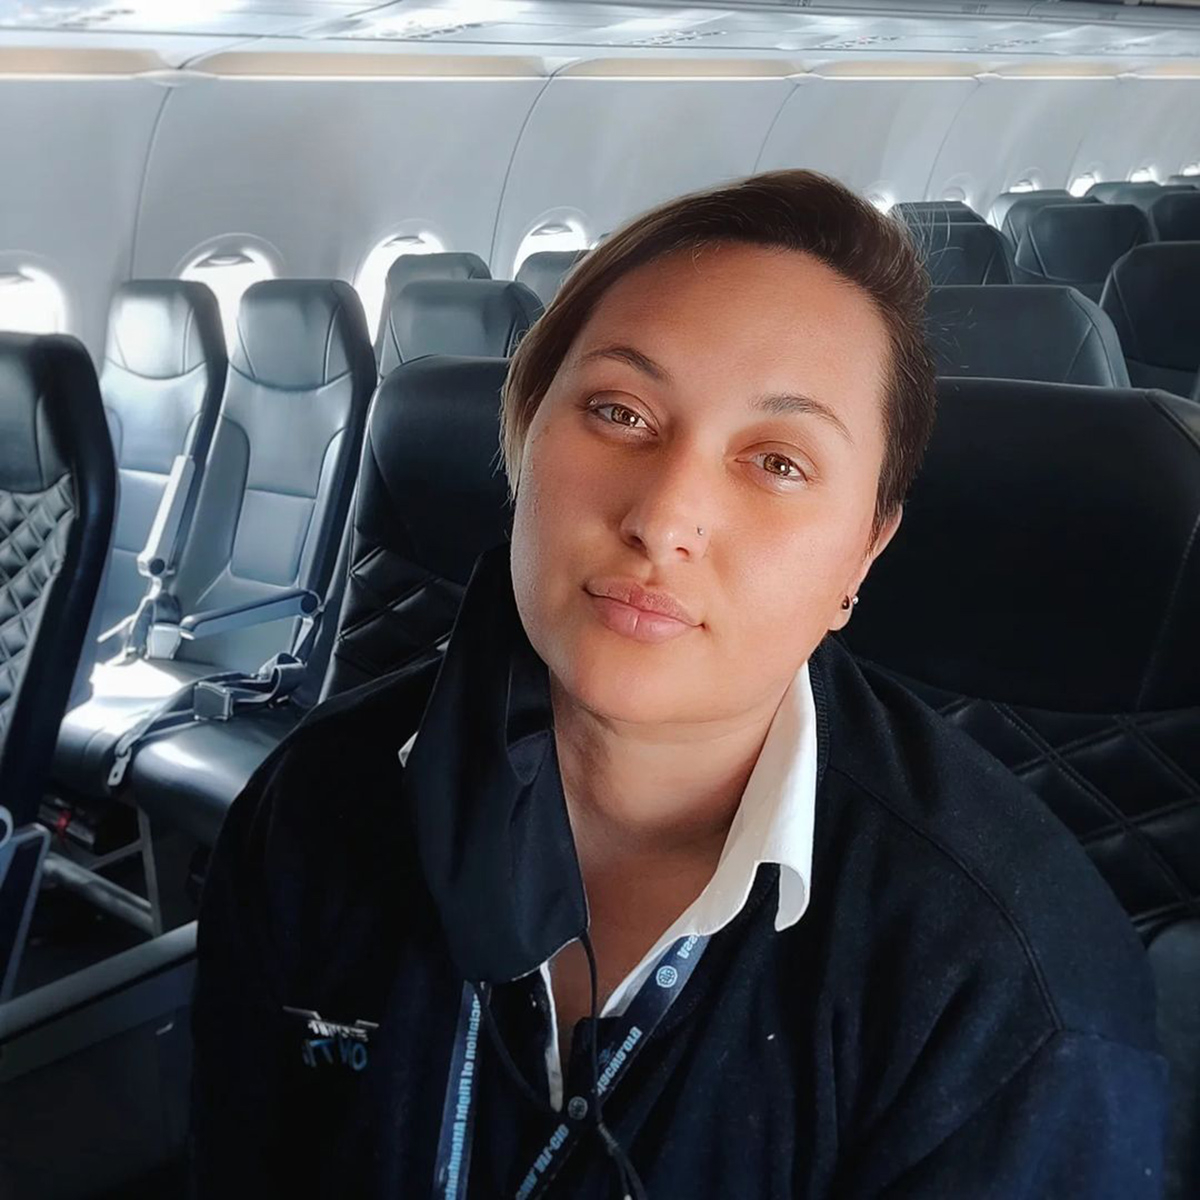 Flight Attendant Helped Deliver “Tiny” Baby in Airplane Bathroom